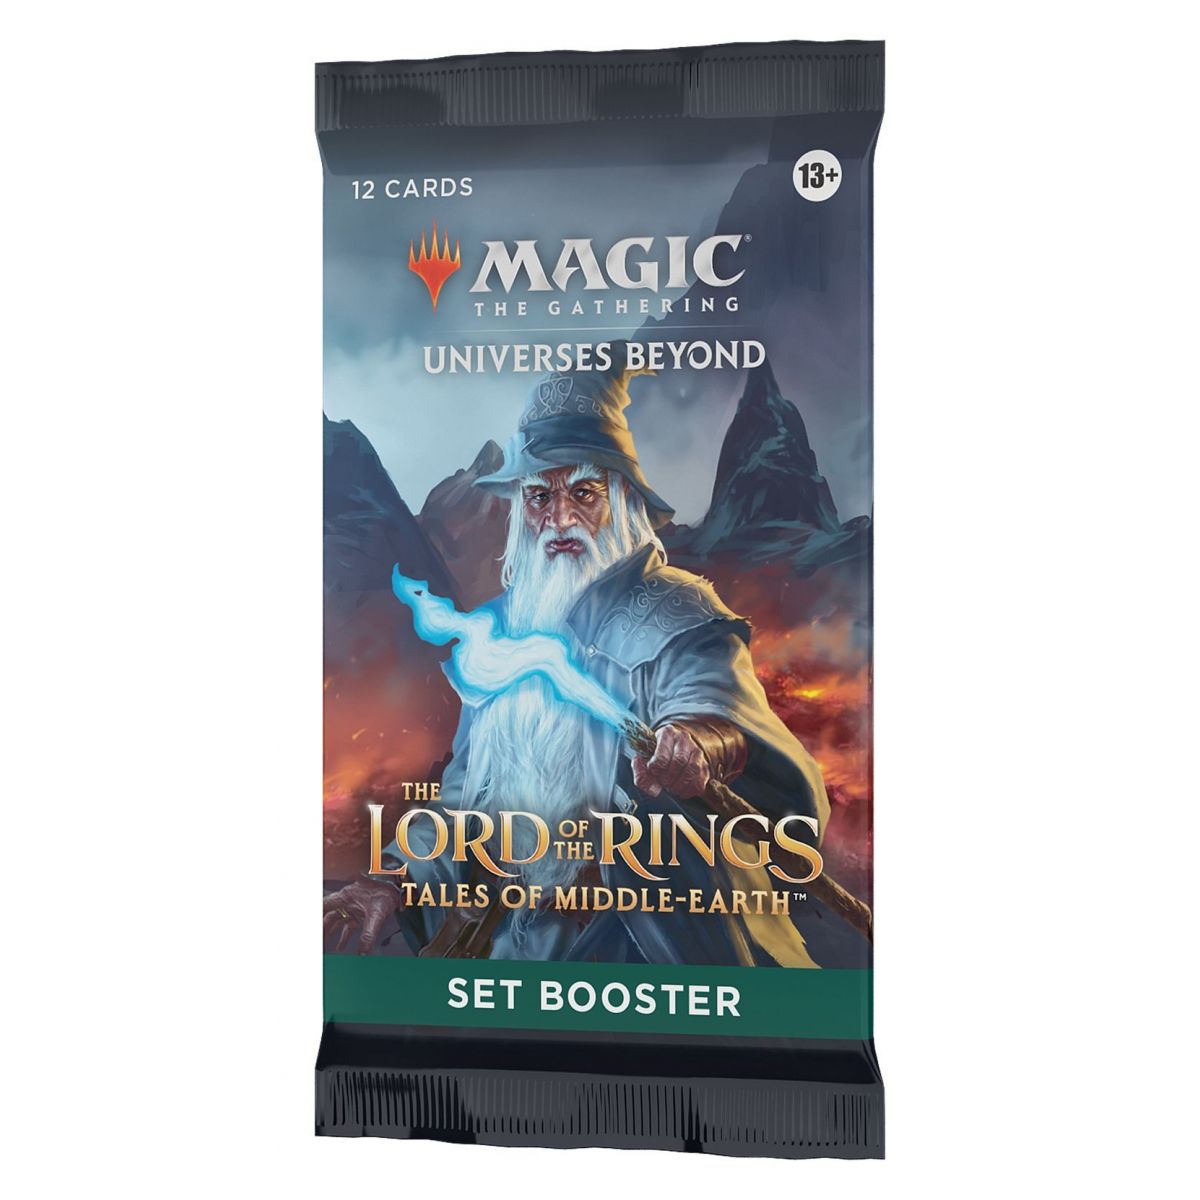 Magic The Gathering - Lot of 6 Booster Boxes - Set - The Lord of the Rings: Chronicles of Middle-earth - EN